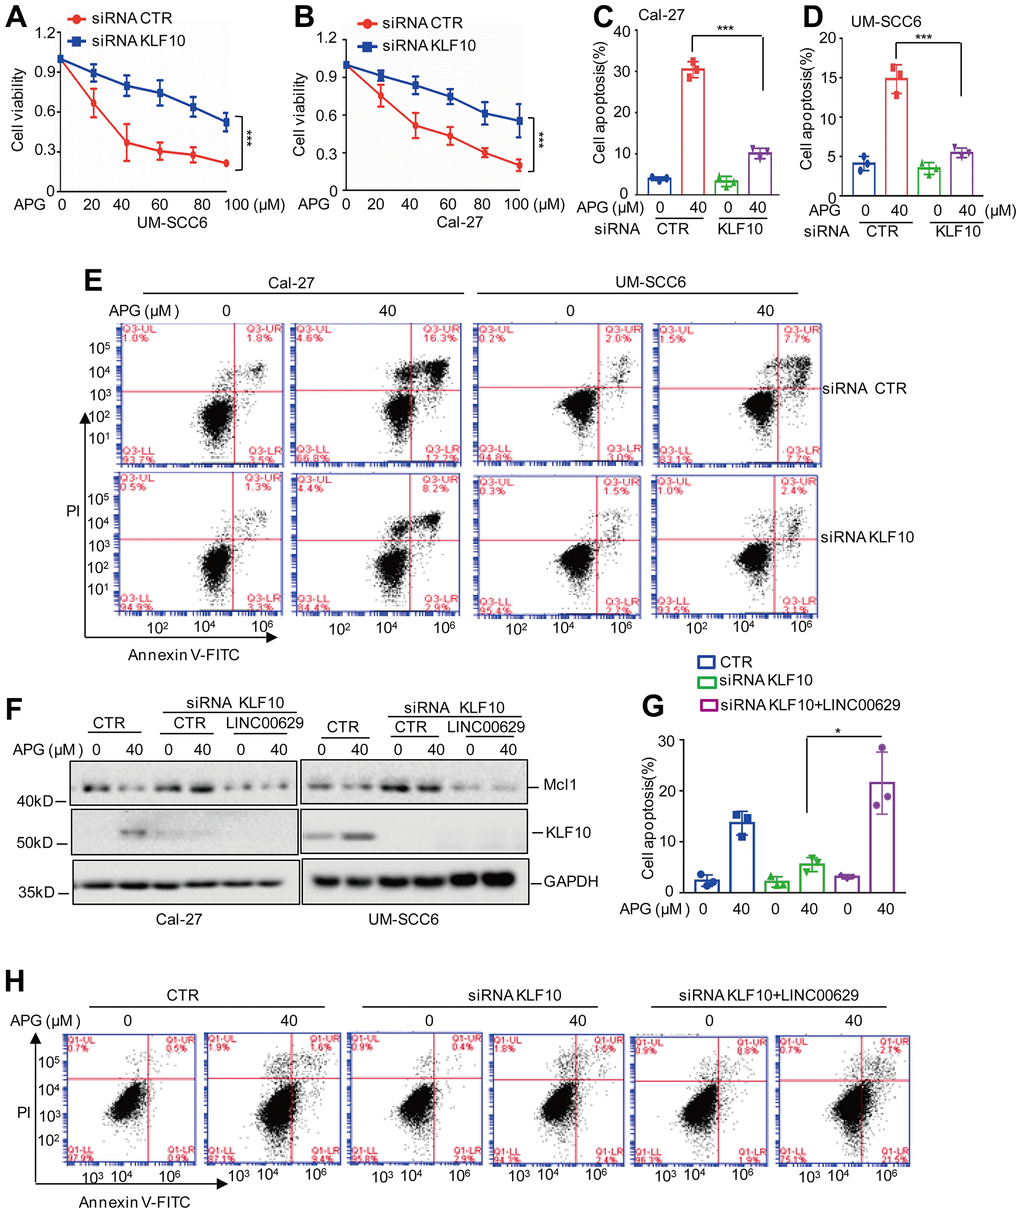 The KLF10-LINC00629-Mcl1 axis plays an important role in the anticancer activity of apigenin. (A, B) UM-SCC6 and Cal-27 cells with or without KLF10 knockdown were treated with apigenin as indicated. Cell viability was measured by an MTT assay. (C–E) Apoptosis was analyzed by flow cytometry. (F) LINC00629 was overexpressed in Cal-27 and UM-SCC6 cells with or without KLF10 knockdown, and the cells were treated with 40 μM apigenin for 36 h. The expression levels of Mcl1 and KLF10 were determined by Western blotting. (G, H) Apoptosis was analyzed by flow cytometry. In (A–D, G) the results represent three independent experiments; *p